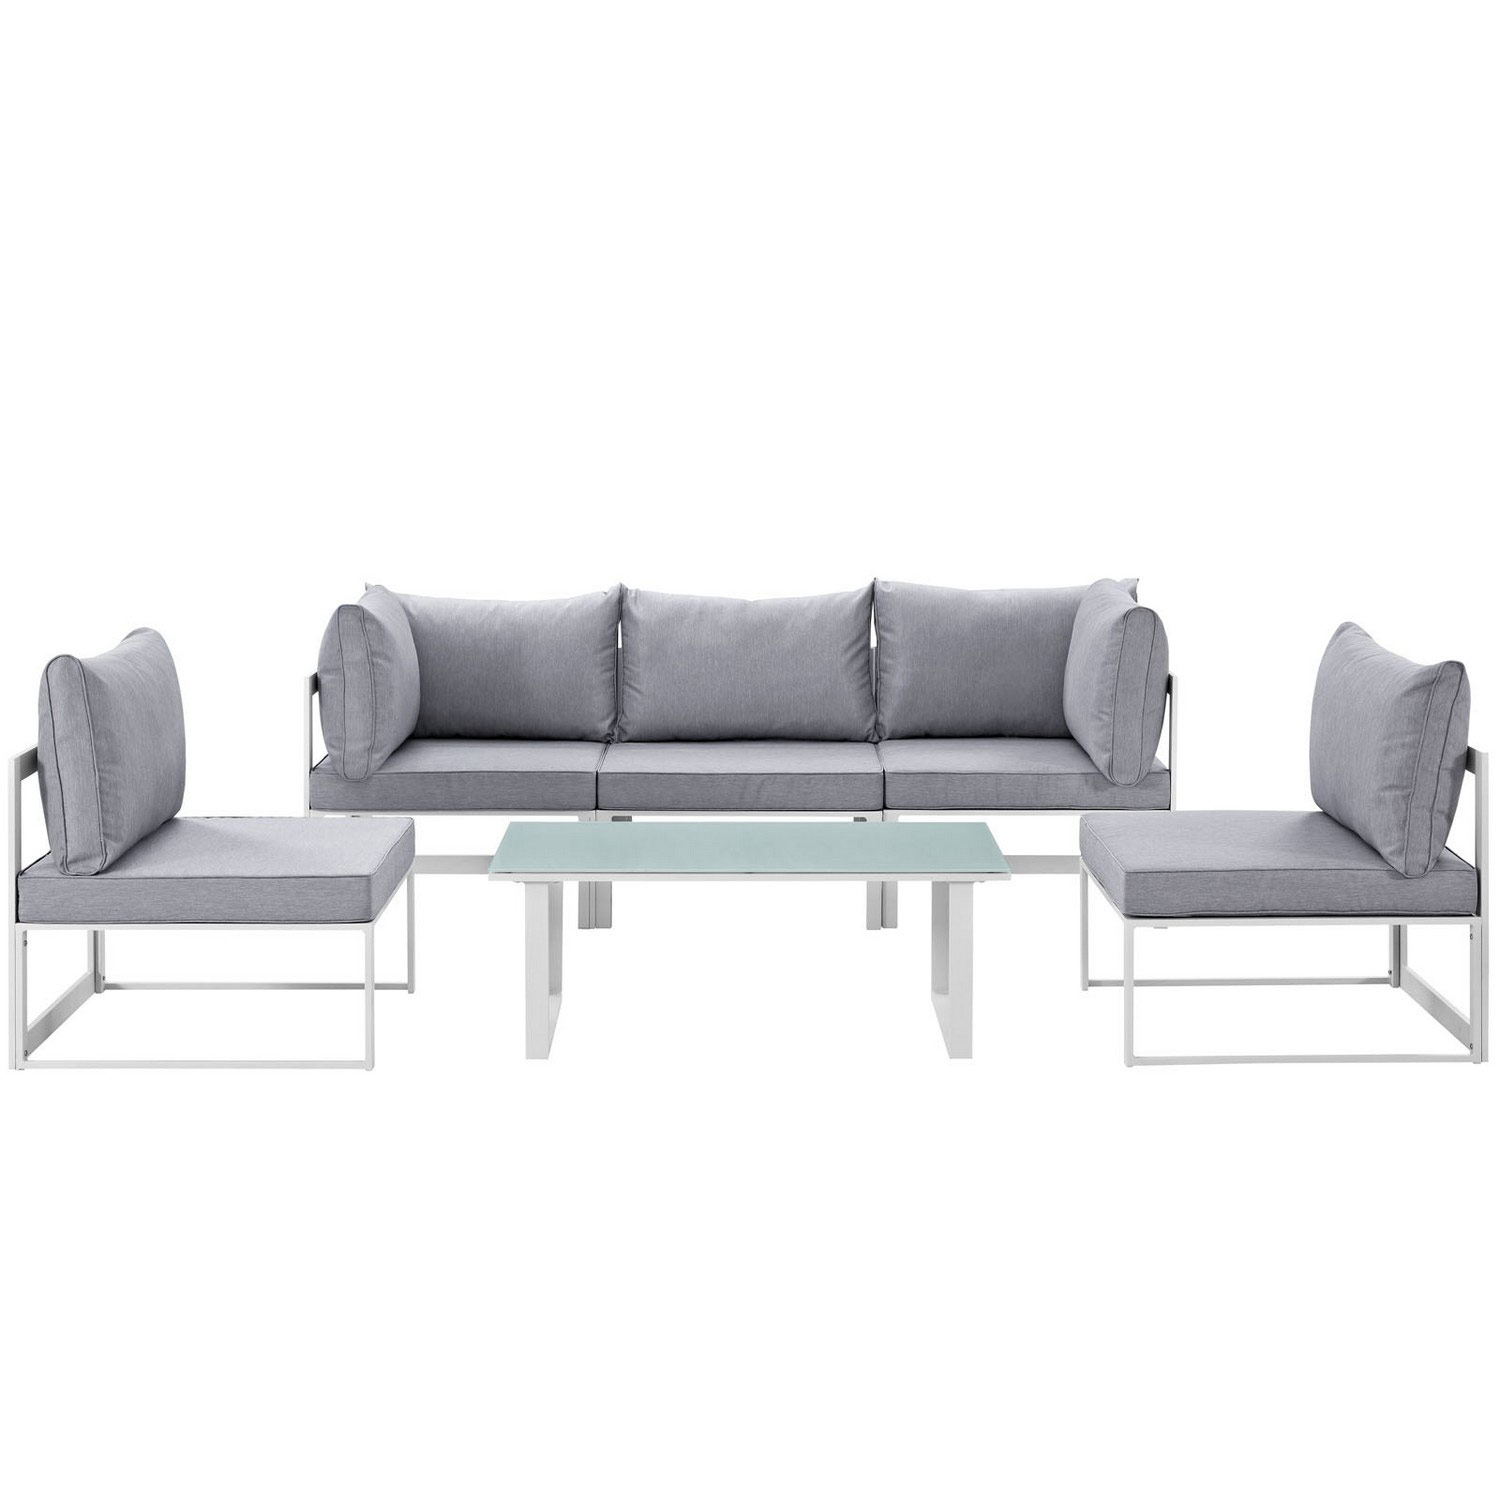 Modway Fortuna 6 Piece Outdoor Patio Sectional Sofa Set - White/Gray